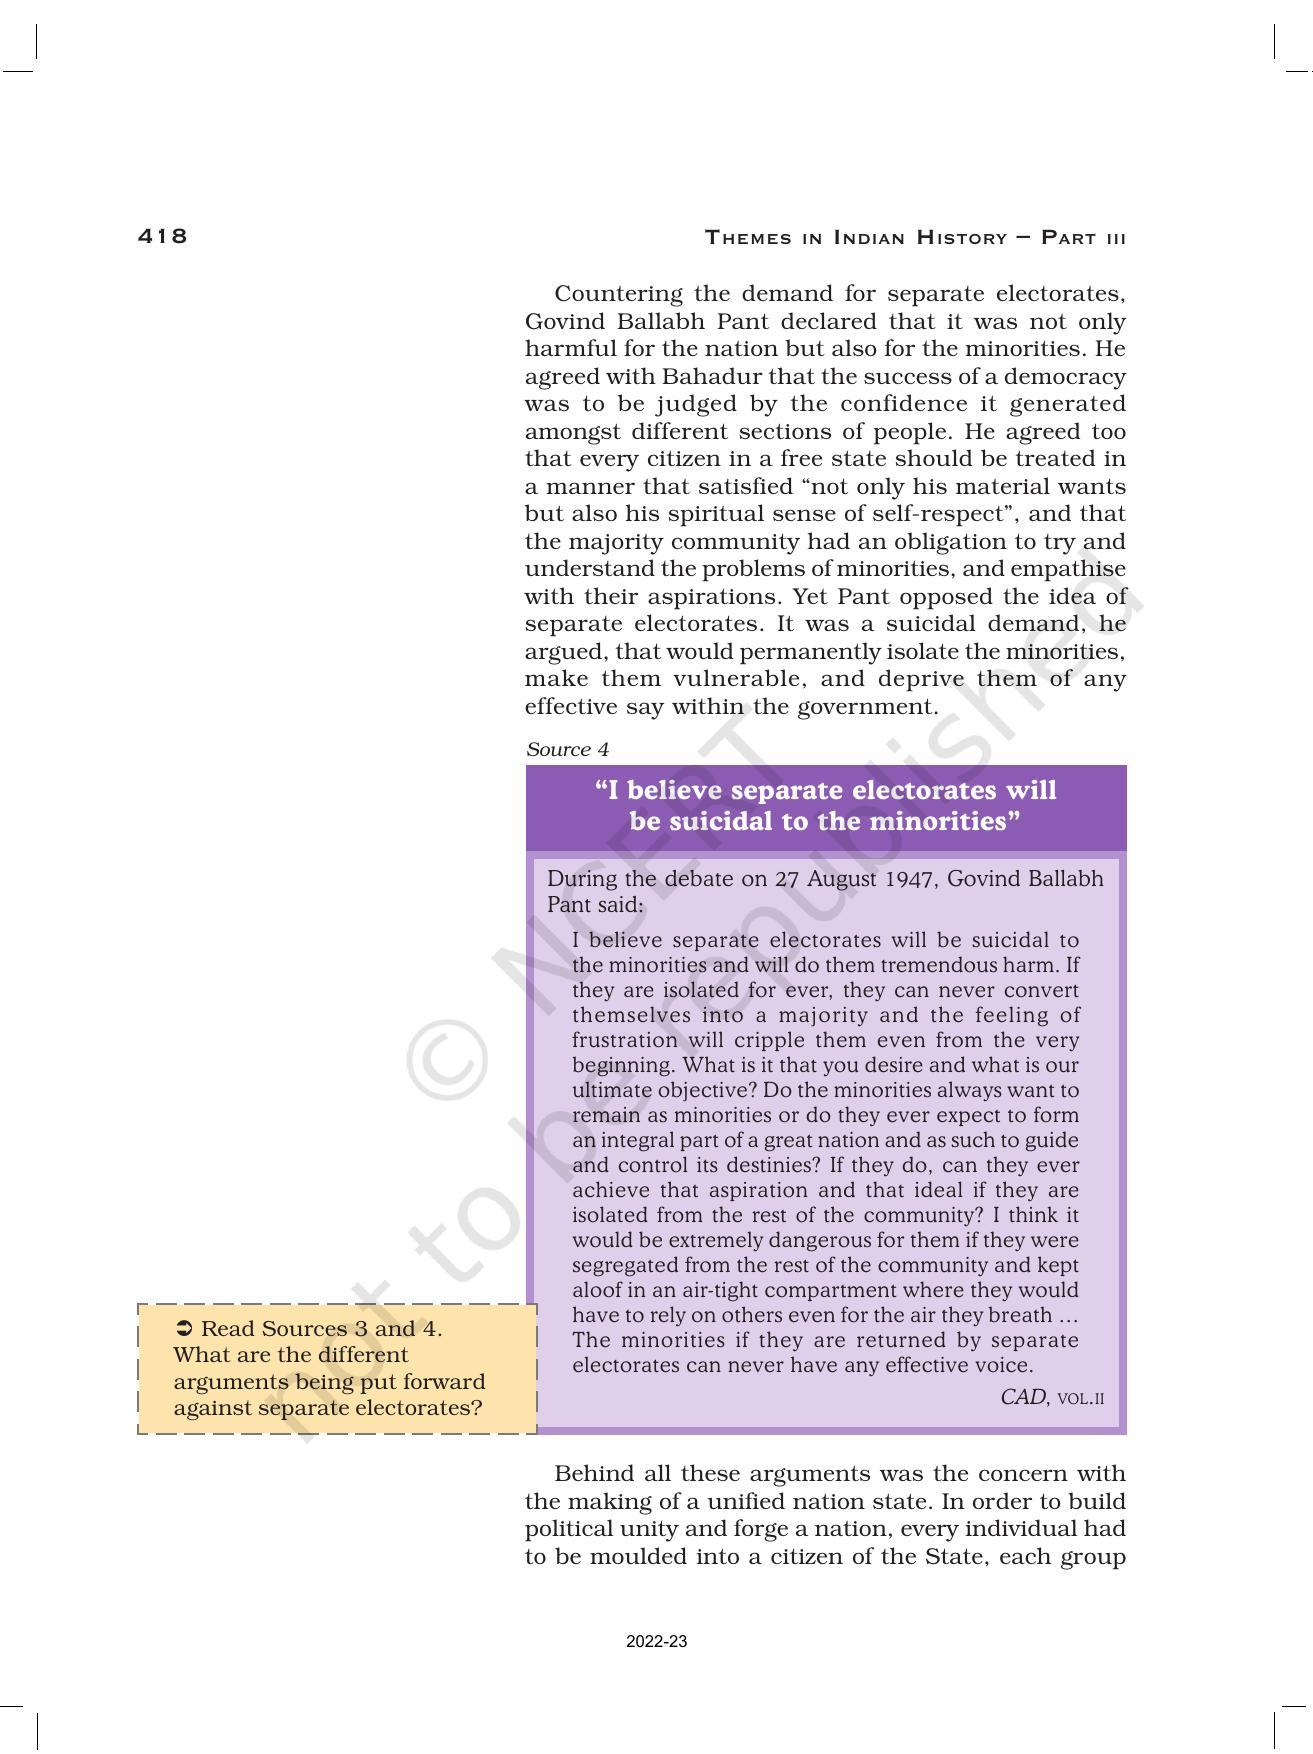 NCERT Book for Class 12 History (Part-III) Chapter 15 Framing and the Constitution - Page 14